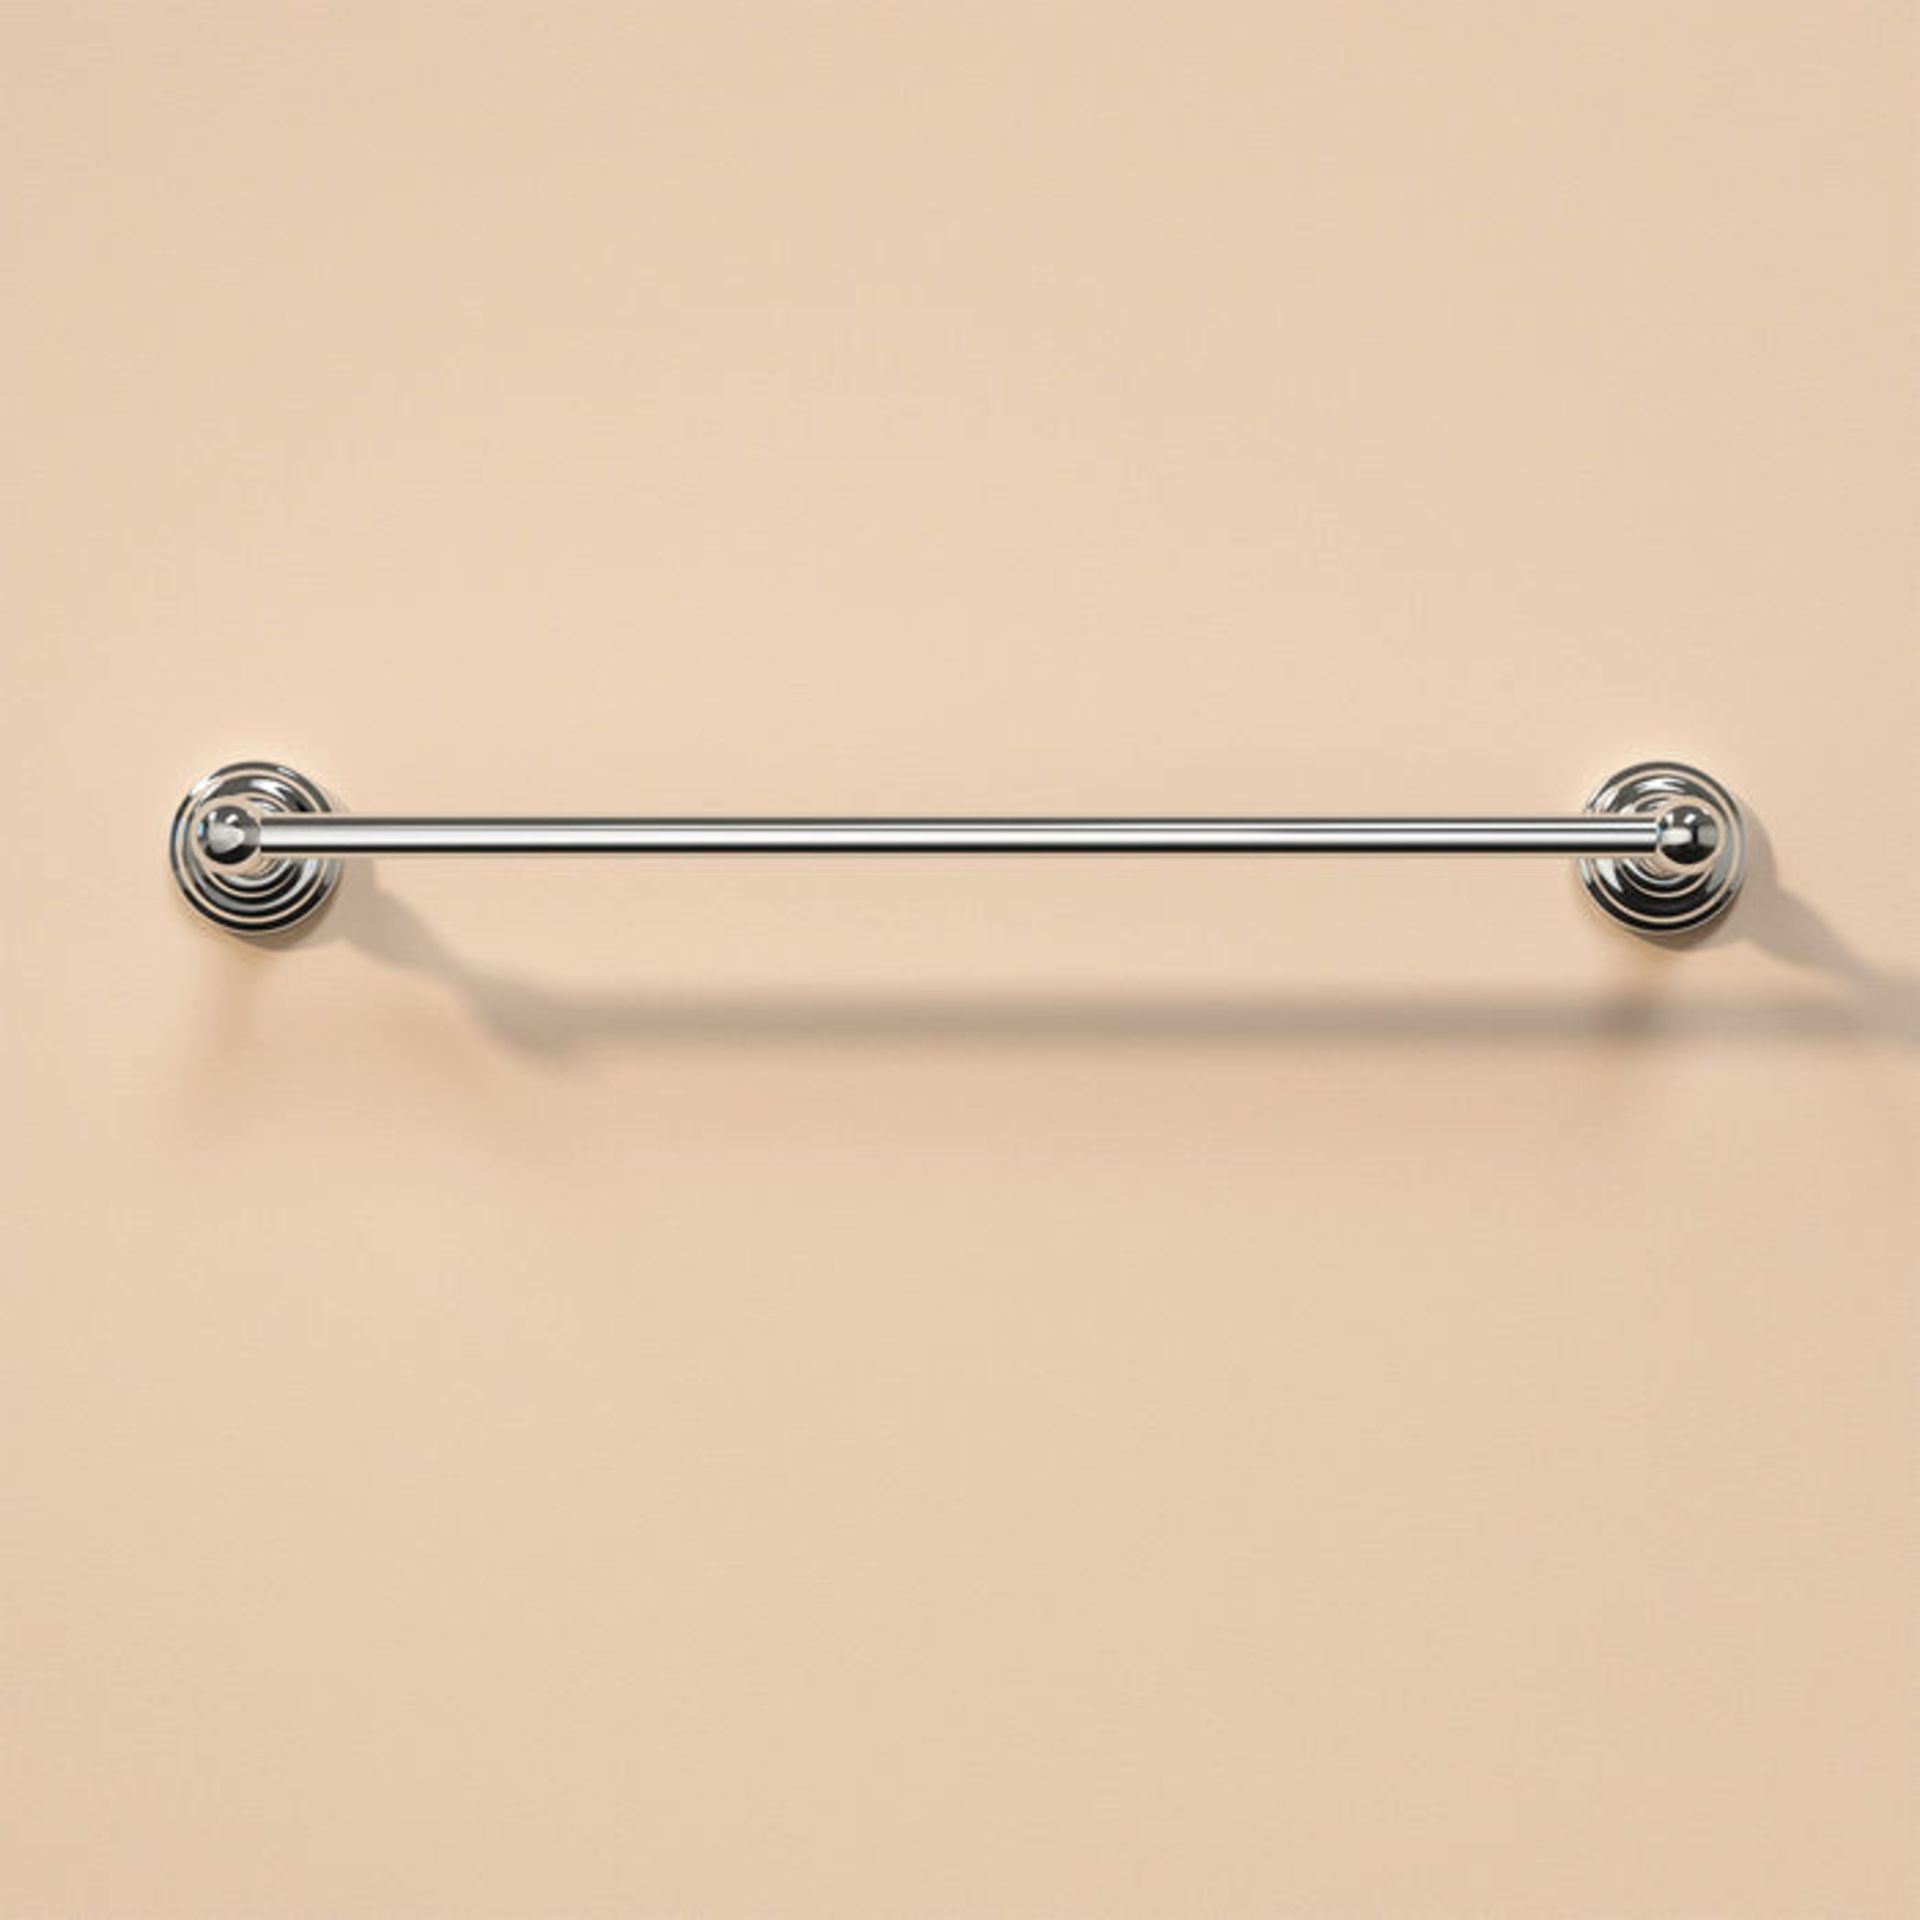 (NF113) York Towel Hanger Rail Finishes your bathroom with a little extra functionality and style - Image 3 of 3